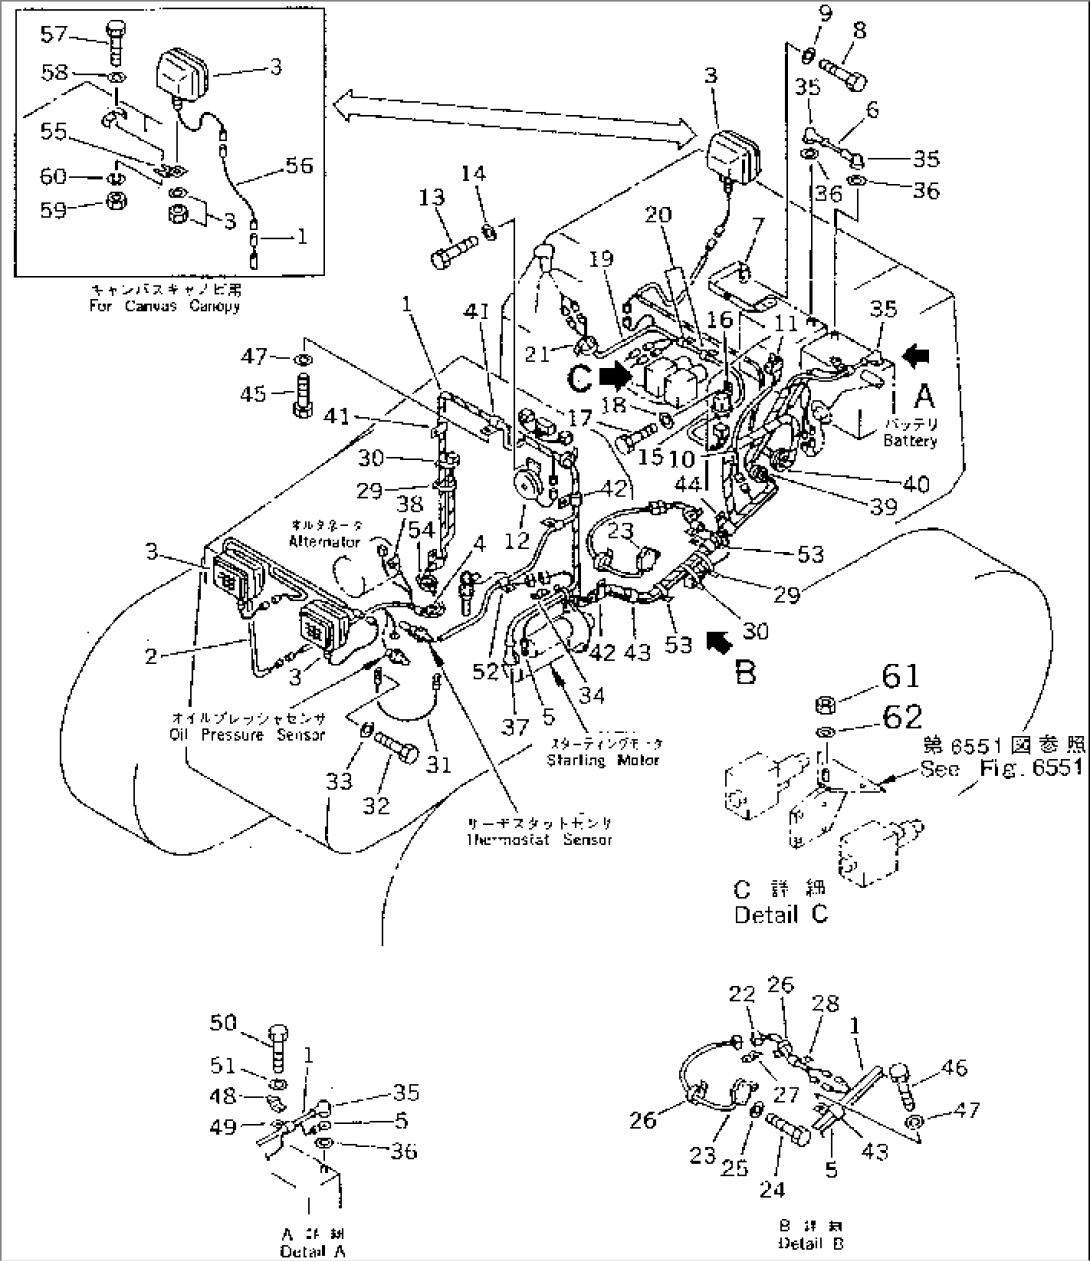 ELECTRICAL SYSTEM (WITHOUT KEY STOP MOTOR)